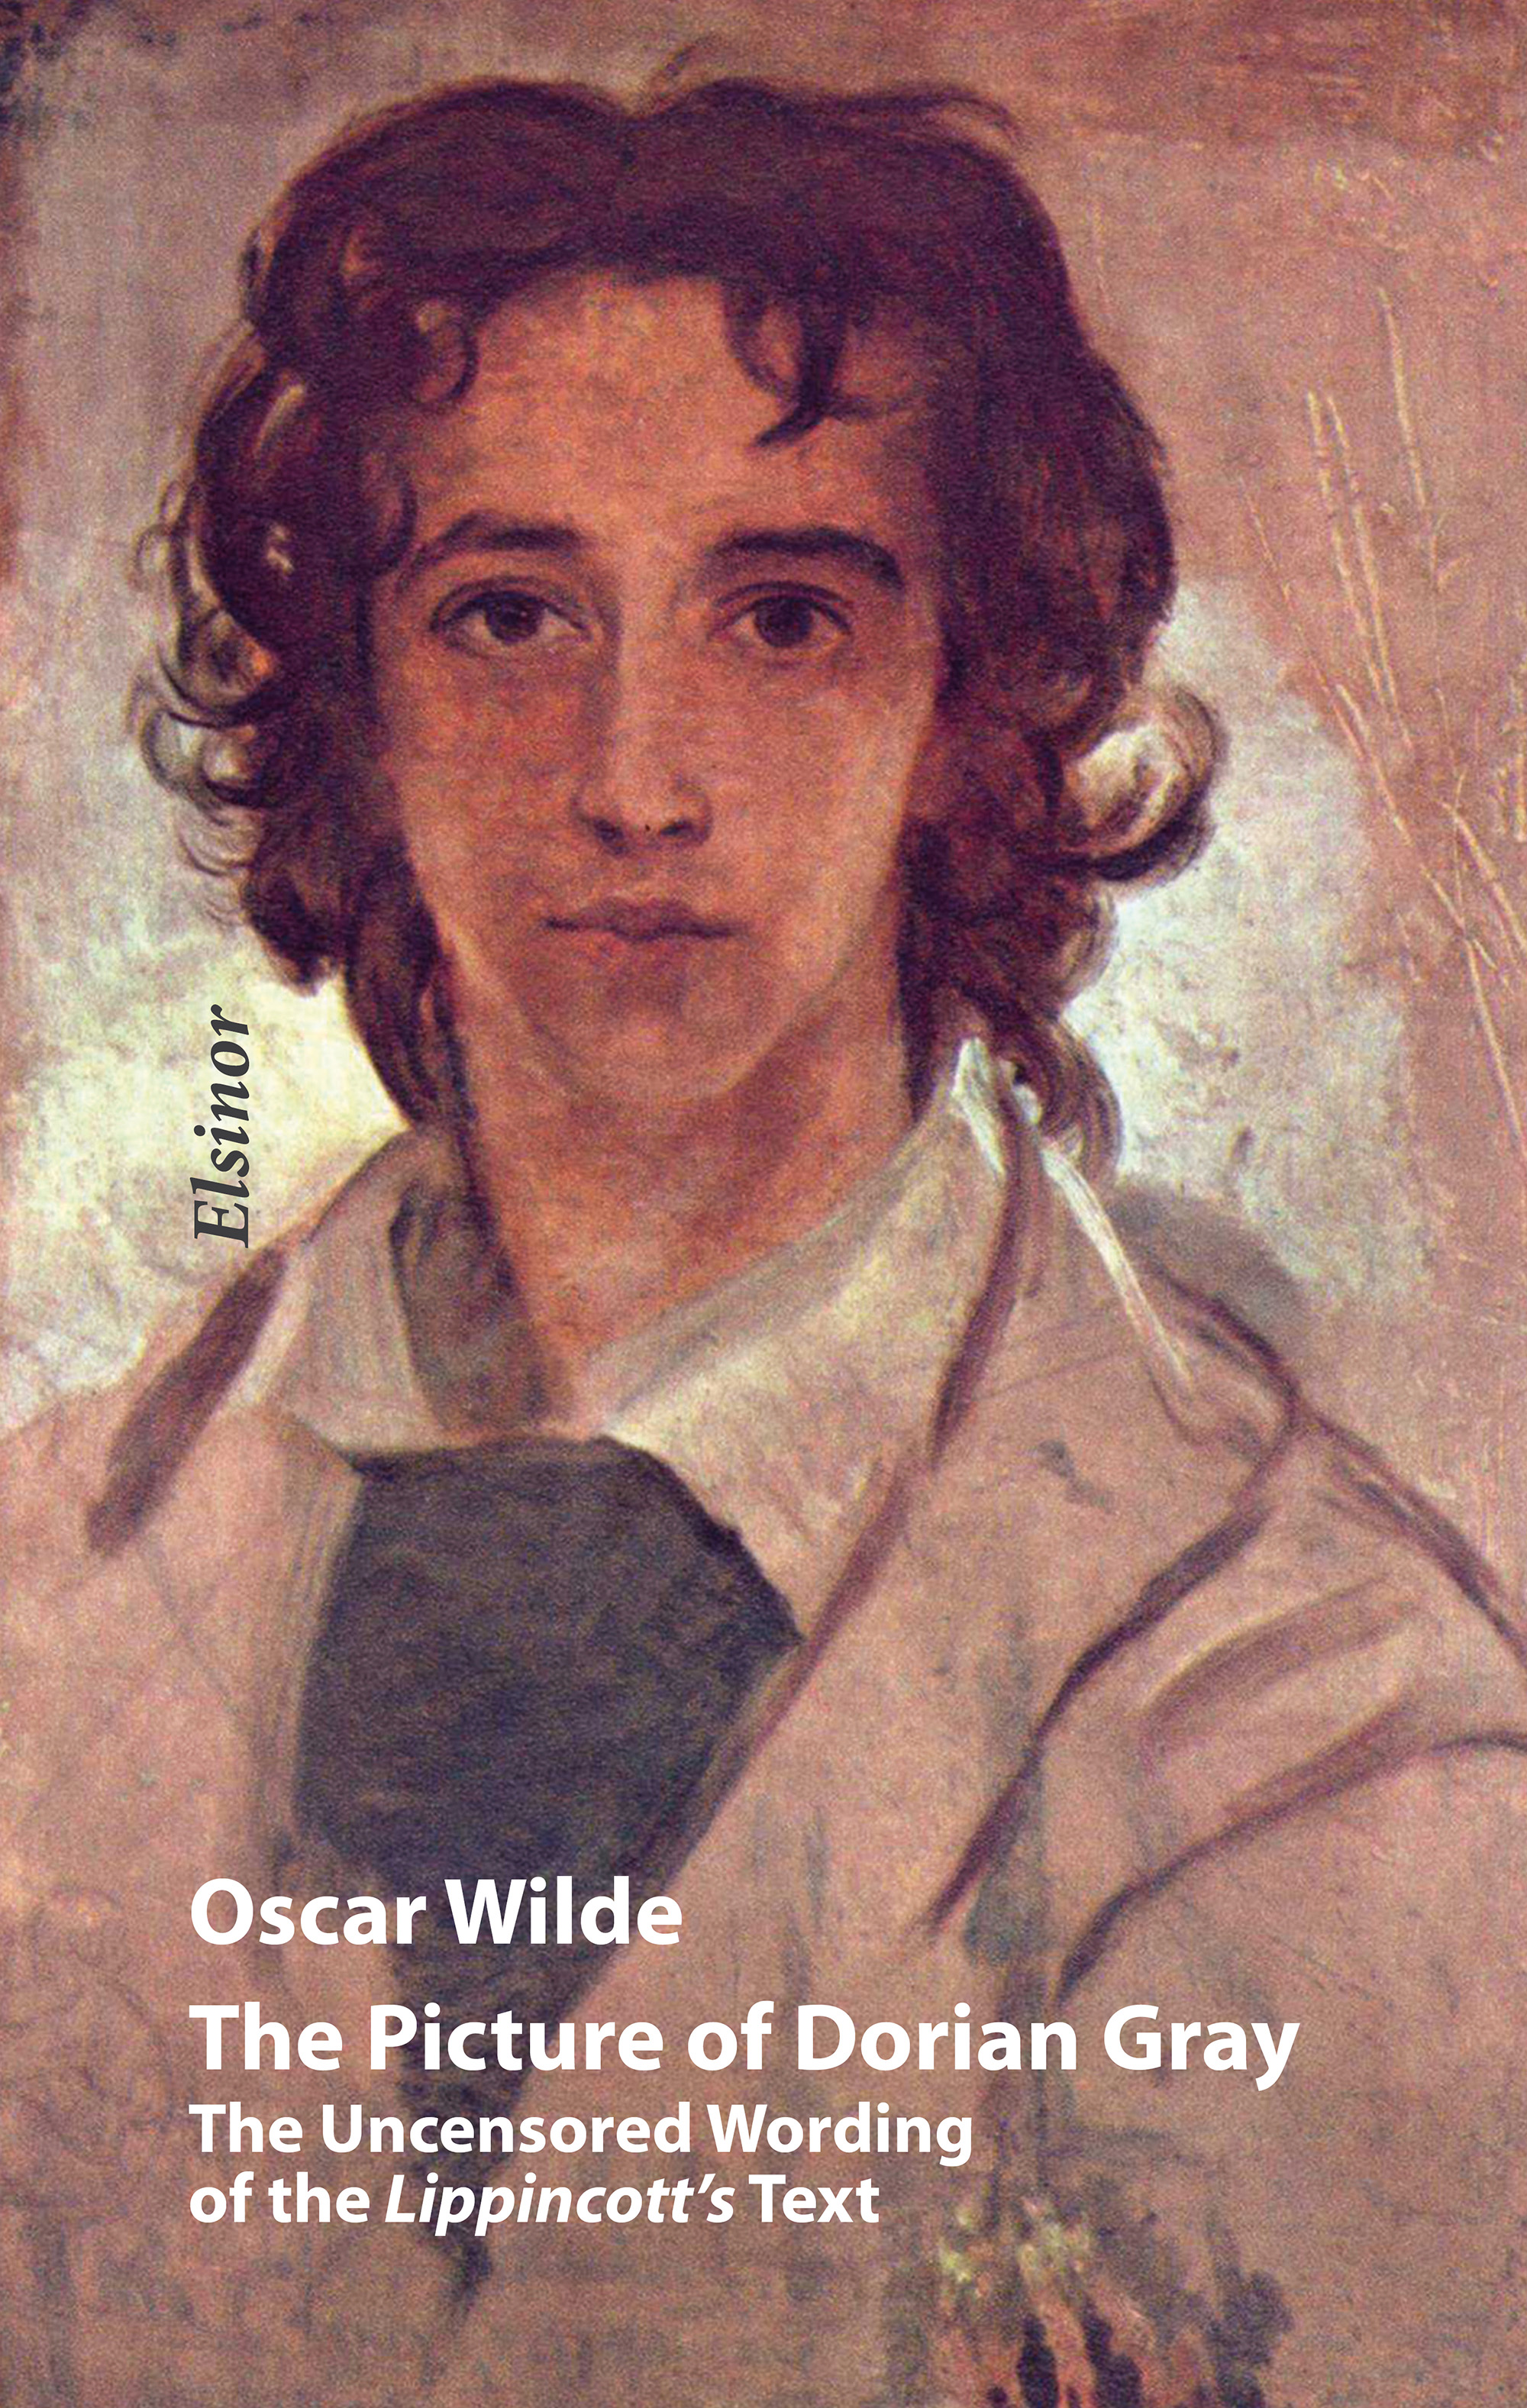 The Picture of Dorian Gray - A Reconstruction of the Uncensored Wording of the Lippincott's Text